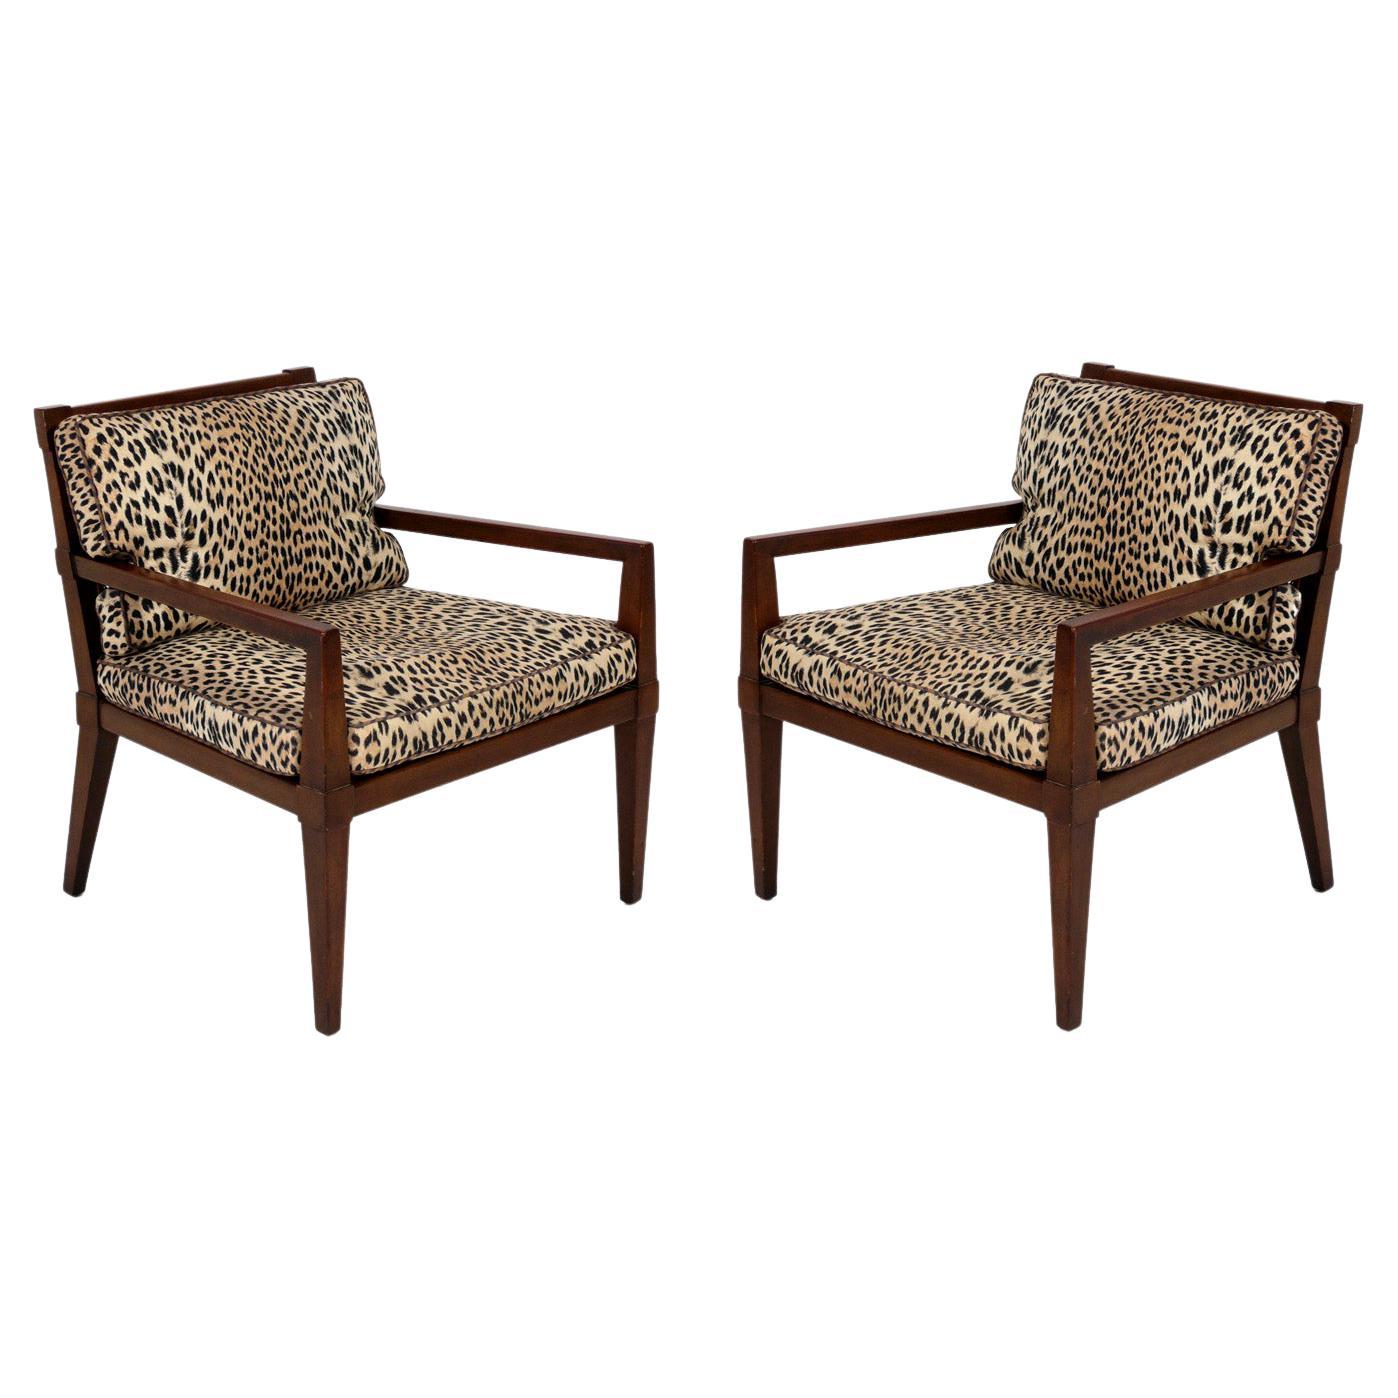 Pair of Caned Lounge Chairs Refinished and Reupholstered